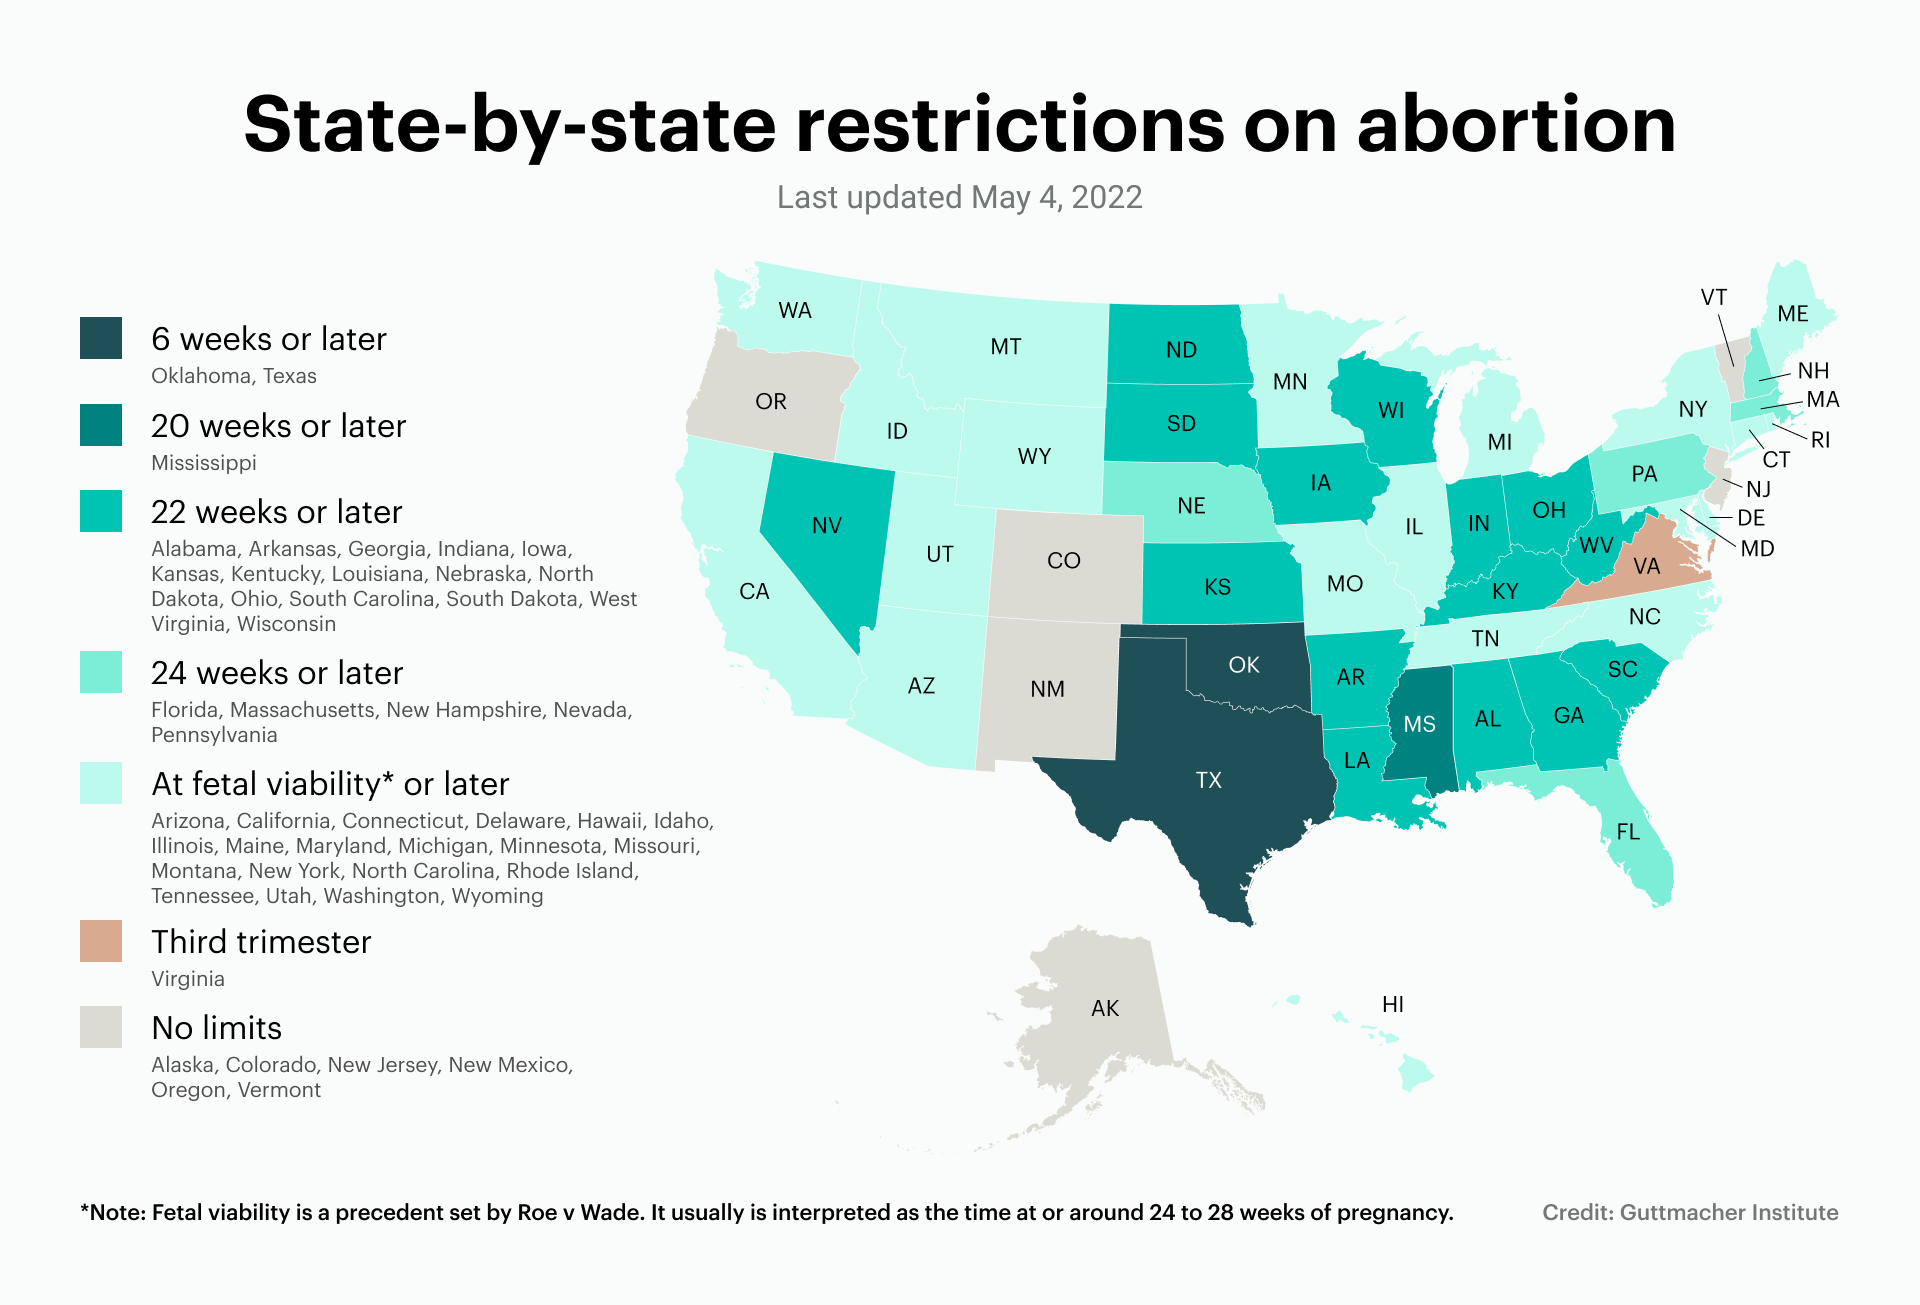 State-by-state restrictions on abortion map